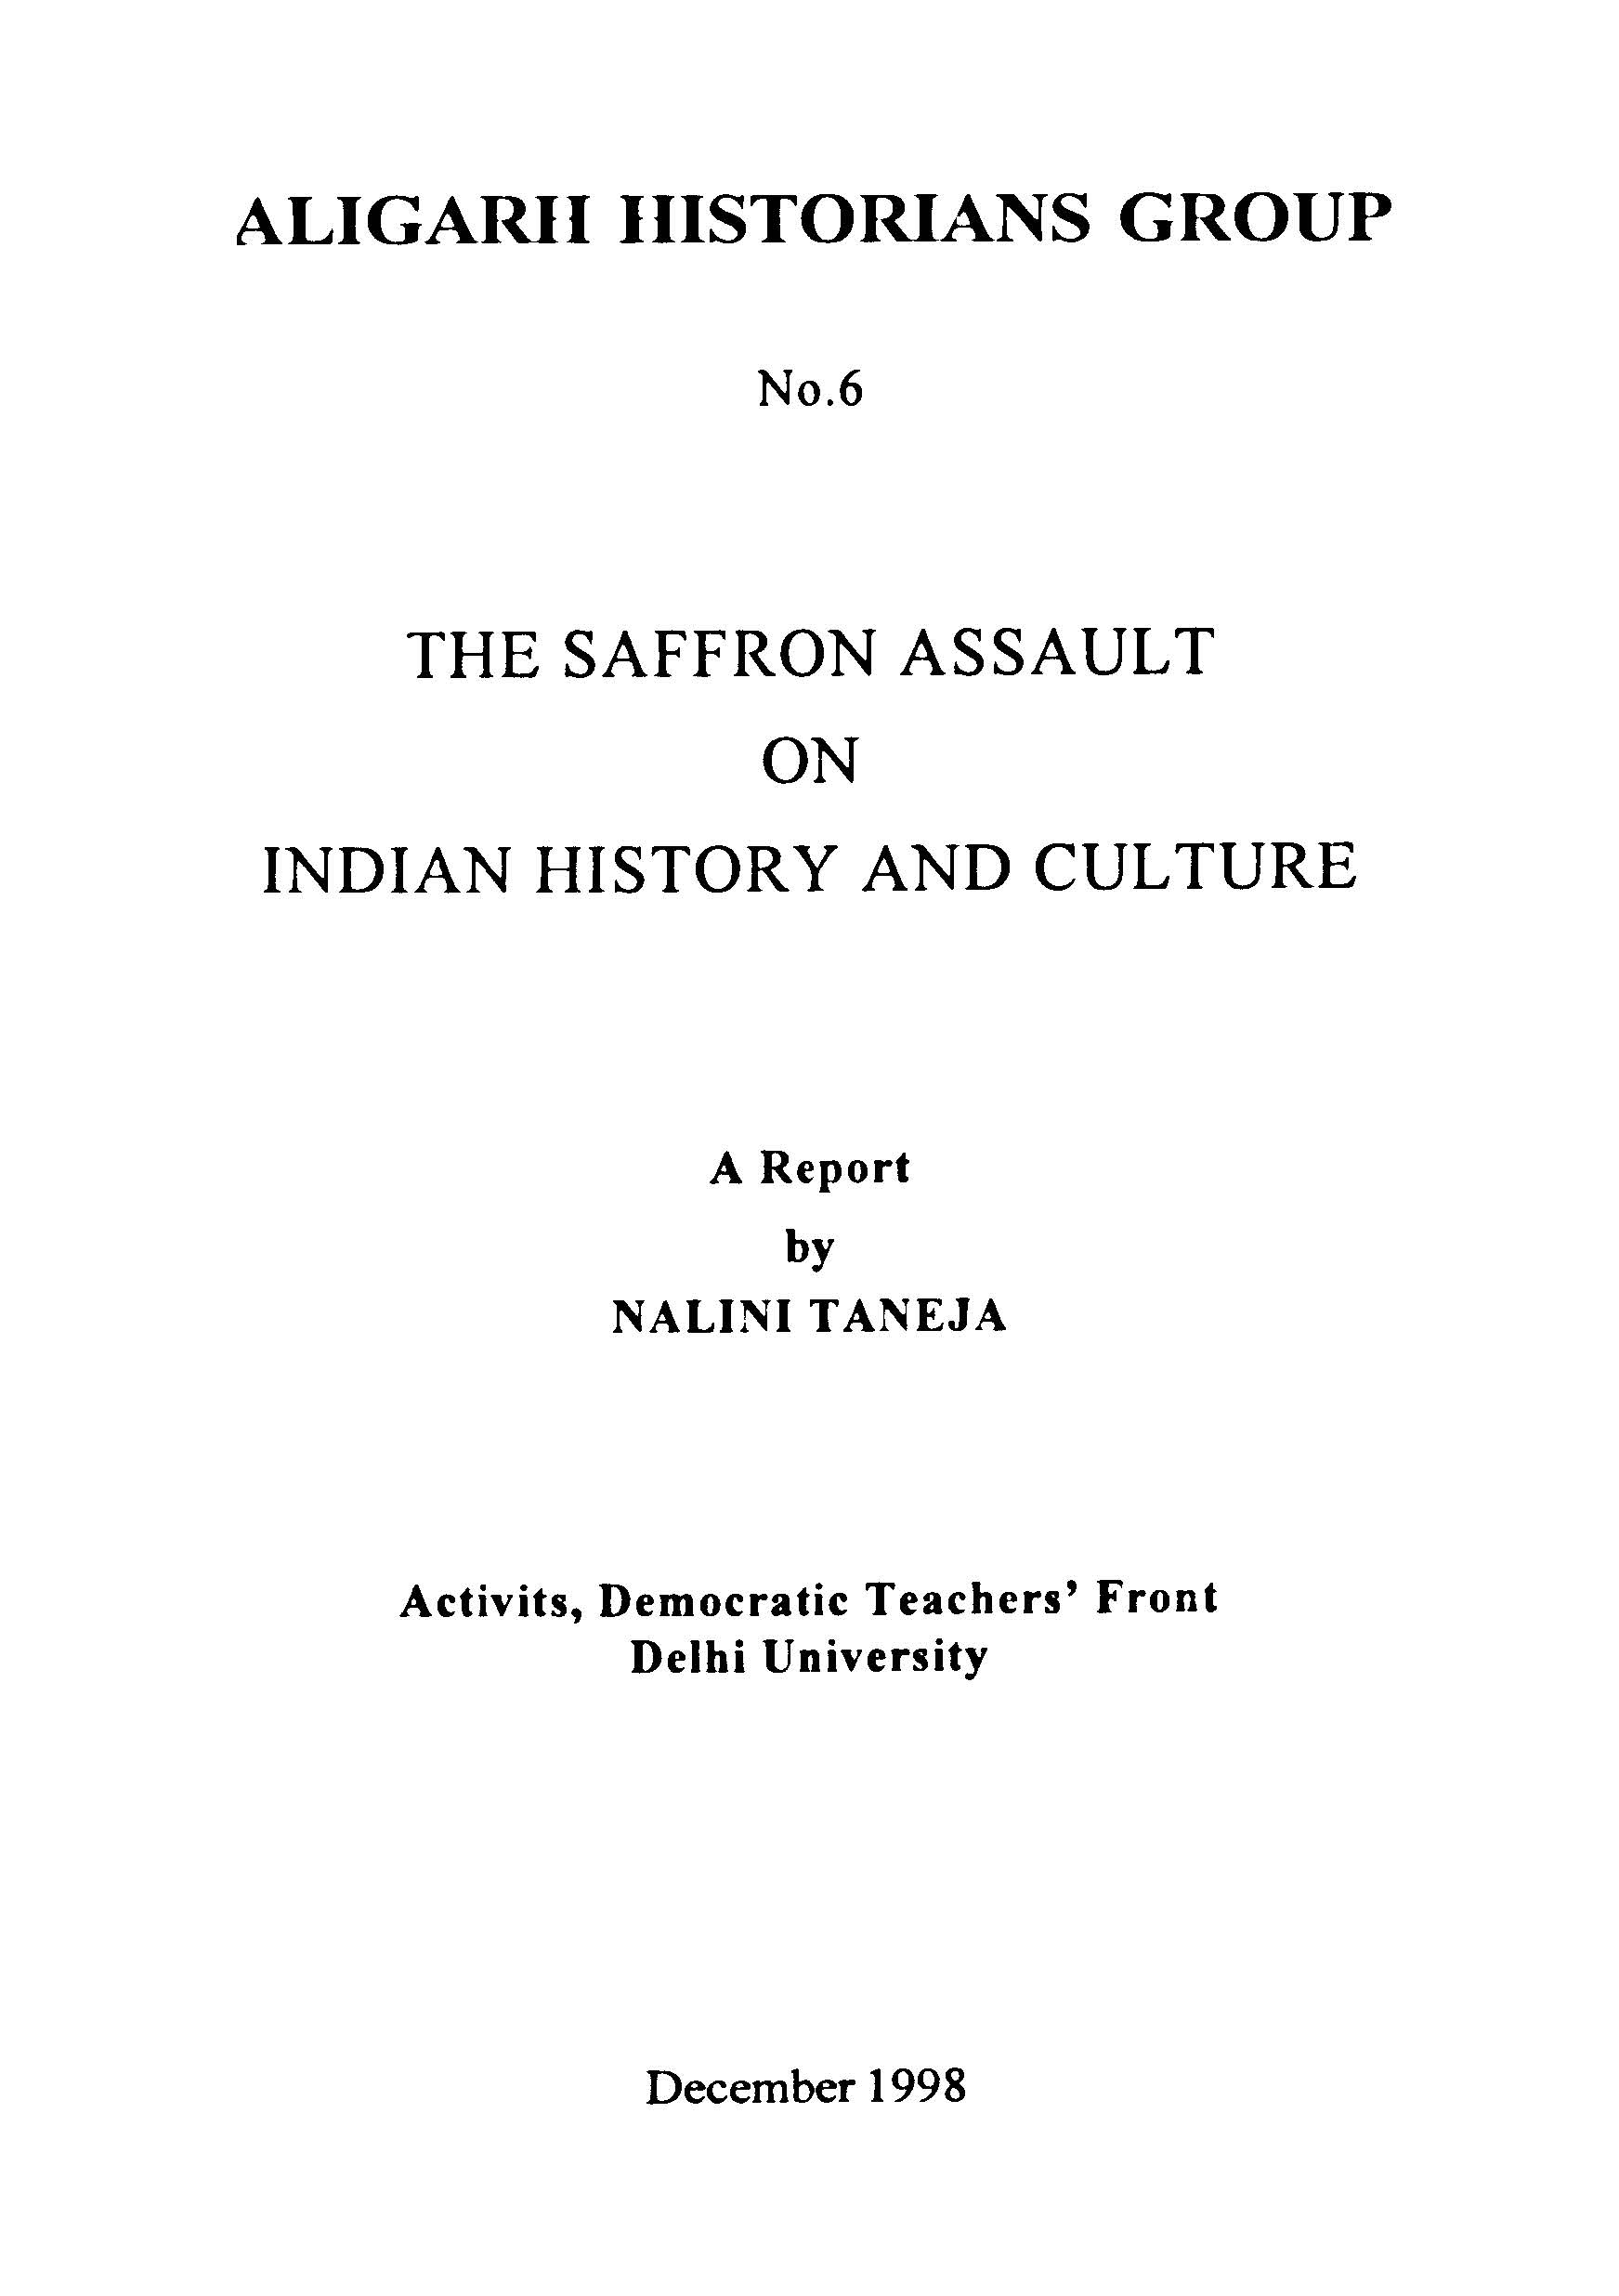 Aligarh historians group no-6 the saffron assault on indian history and culture 